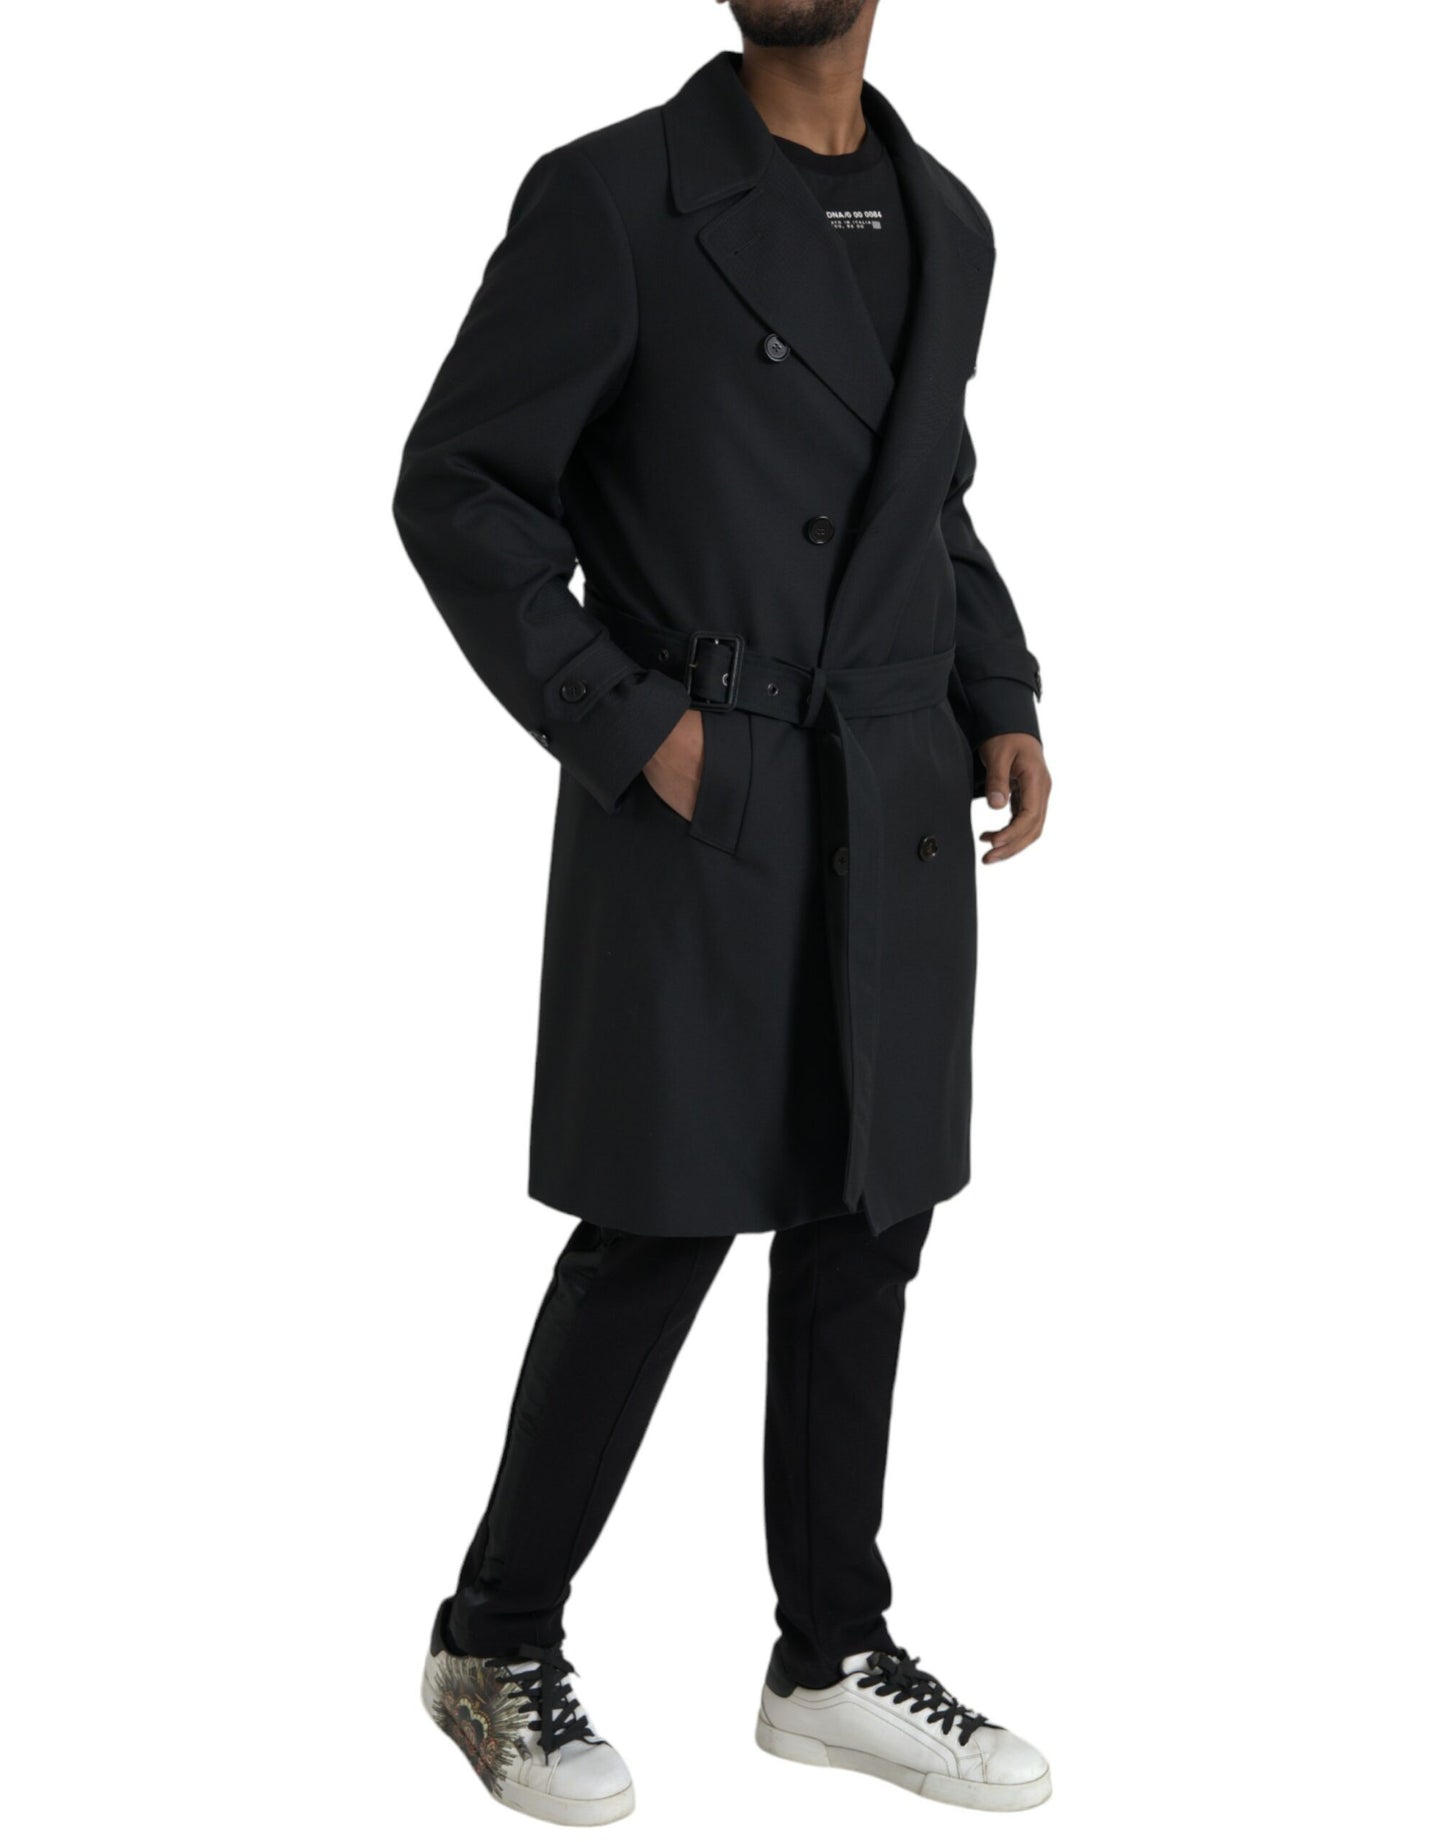 Dolce & Gabbana Black Double Breasted Trench Coat Jacket - Gio Beverly Hills